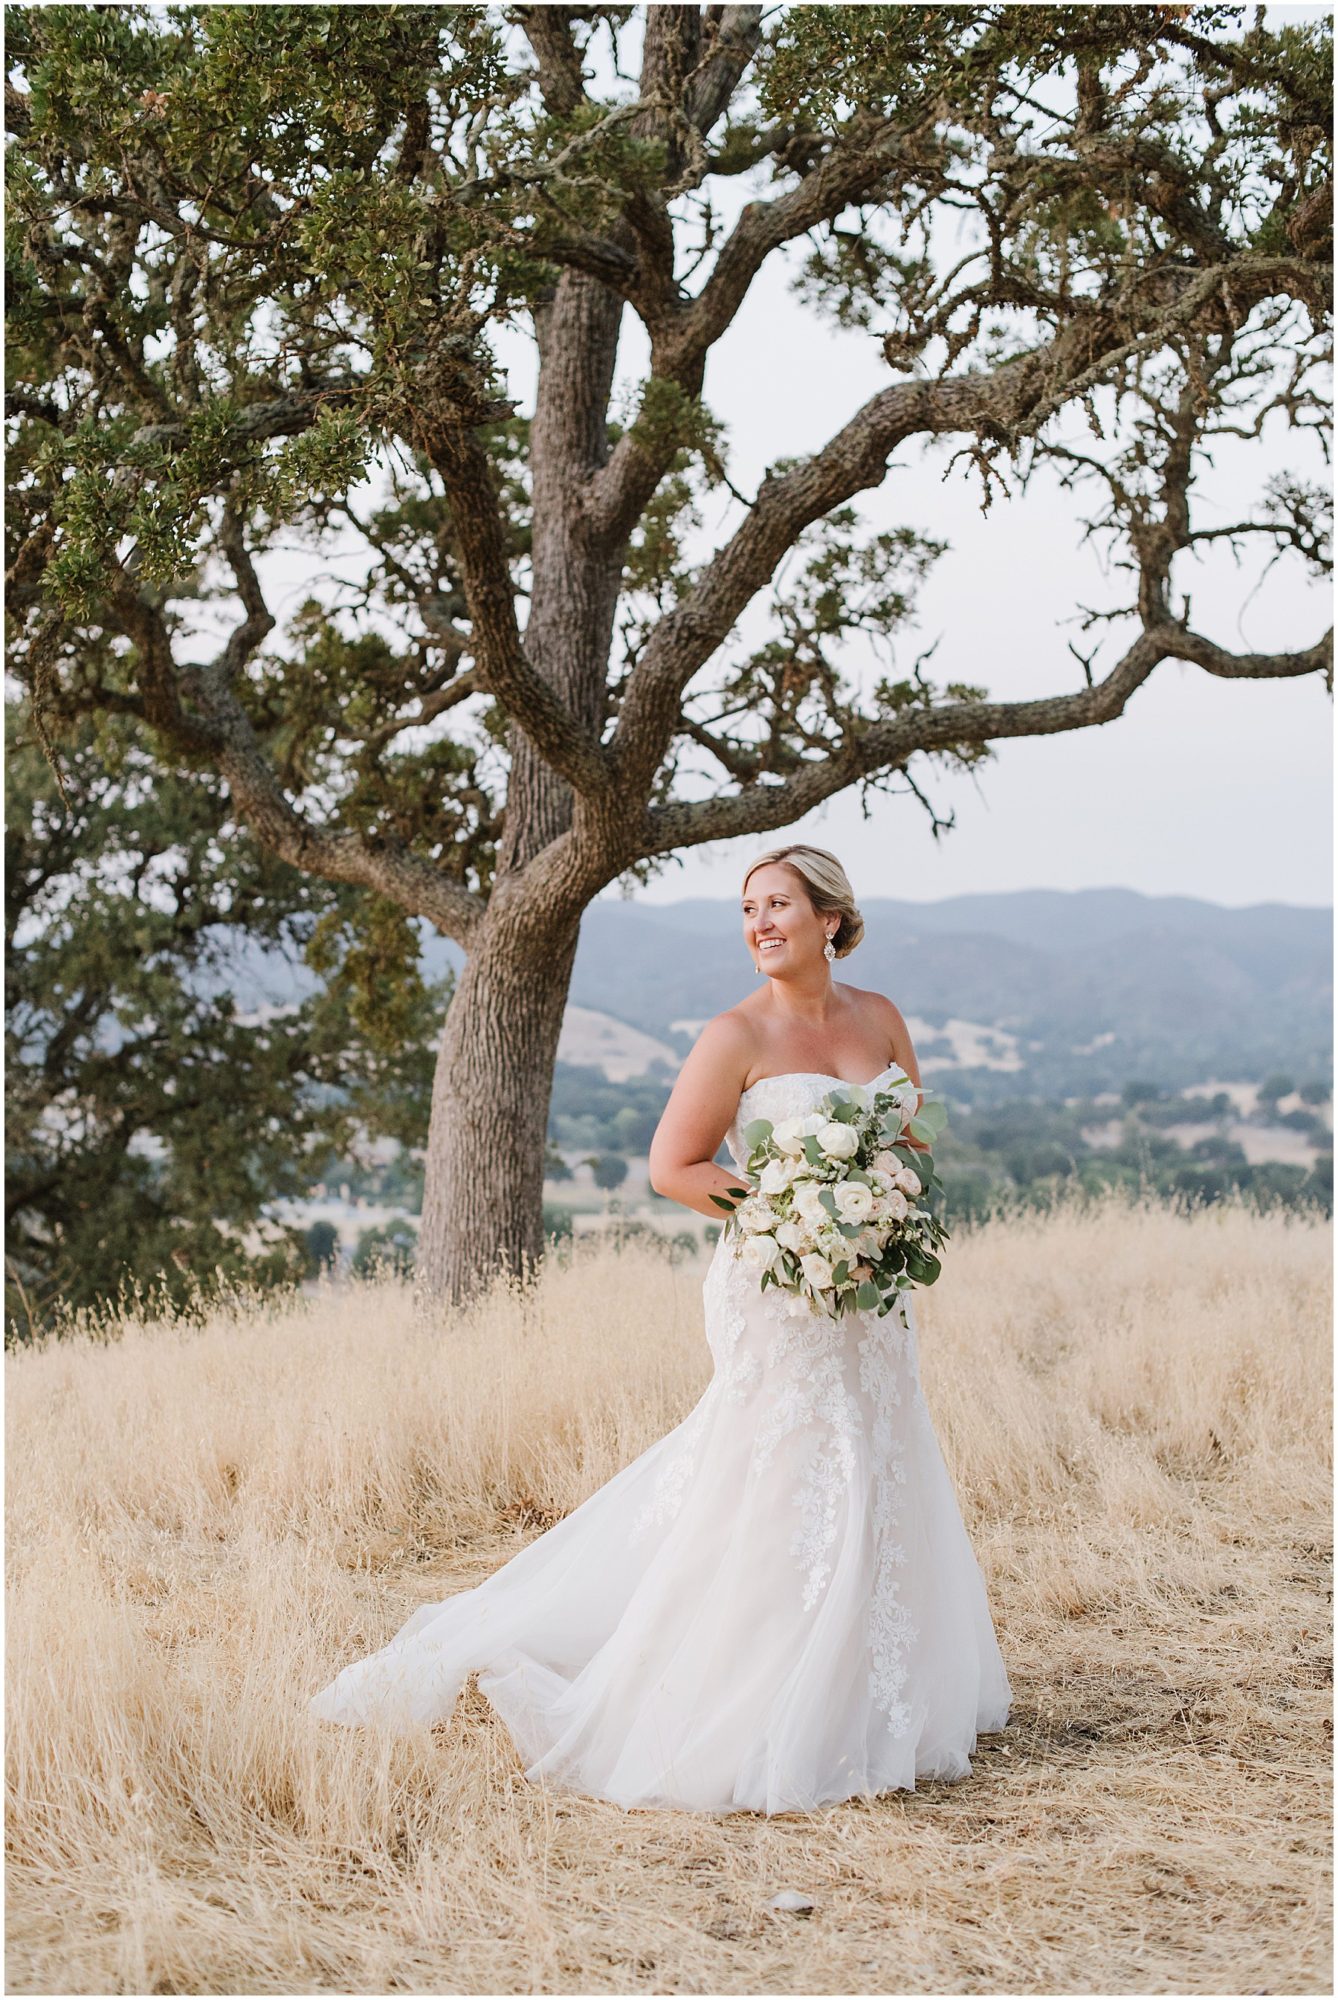 The Grace Maralyn Estate & Gardens Wedding with Whites, Neutrals, & Greenery